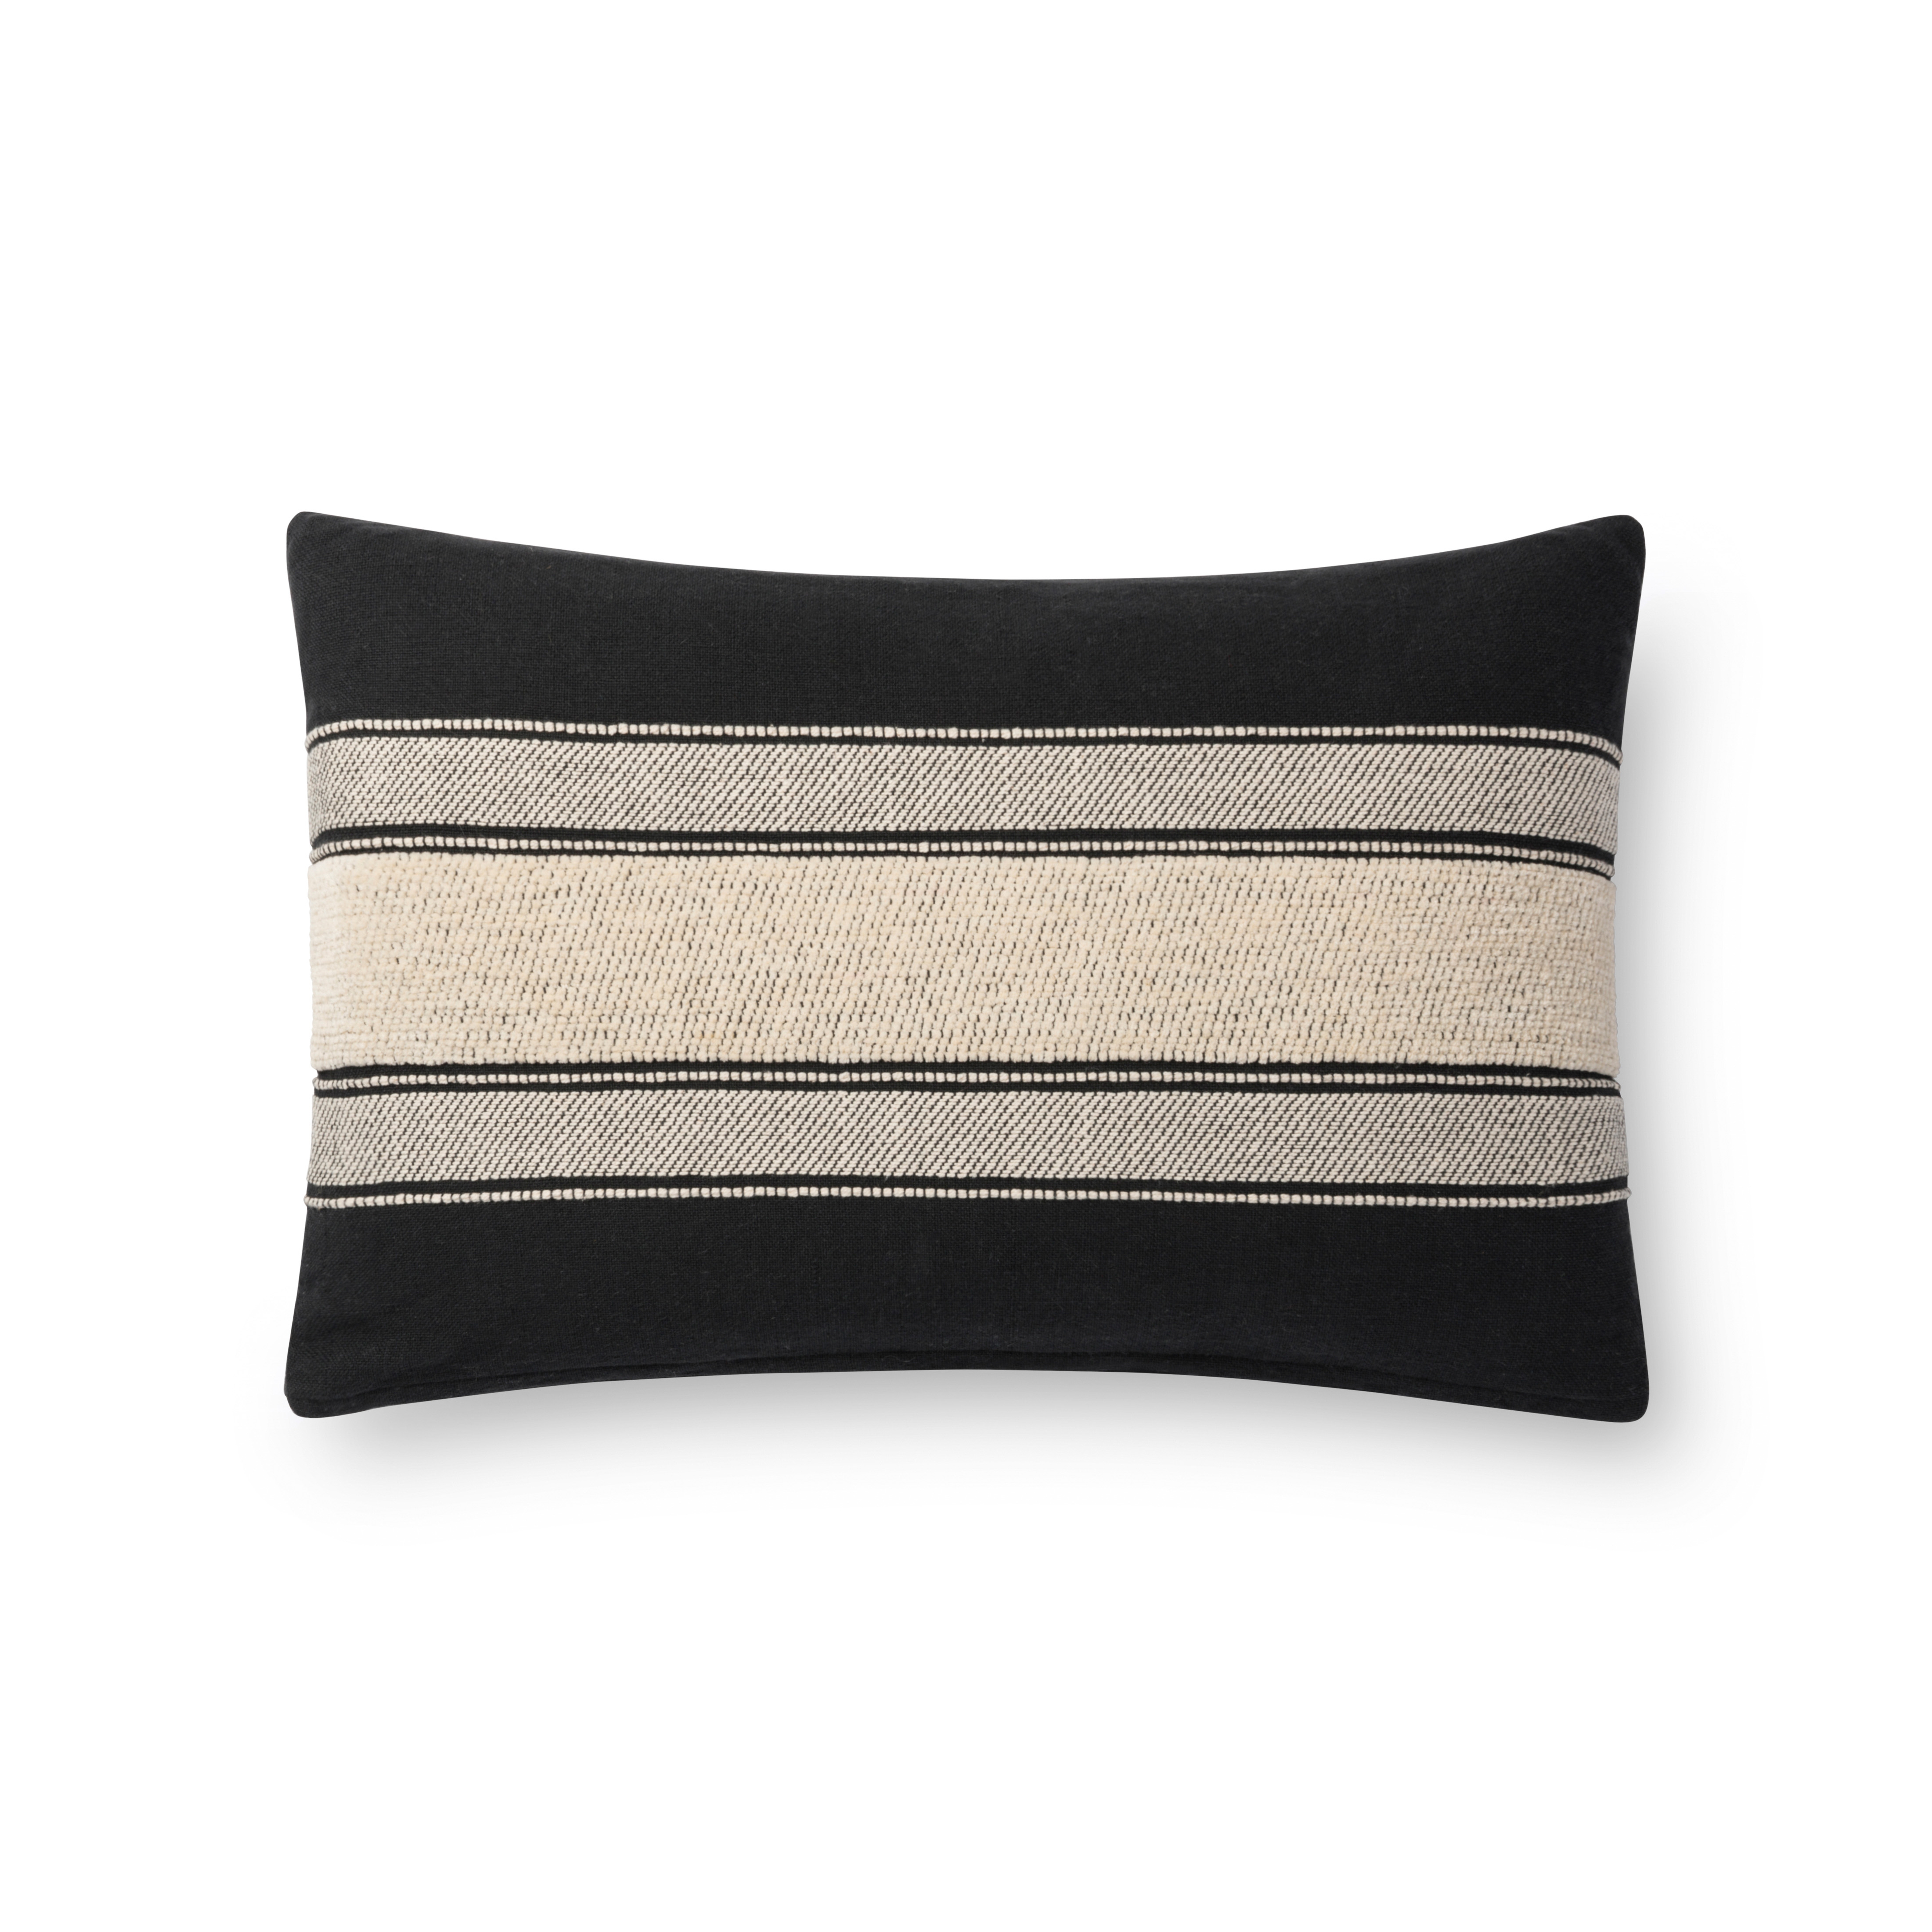 PILLOWS P1116 BLACK / IVORY 13" x 21" Cover w/Poly - Magnolia Home by Joana Gaines Crafted by Loloi Rugs